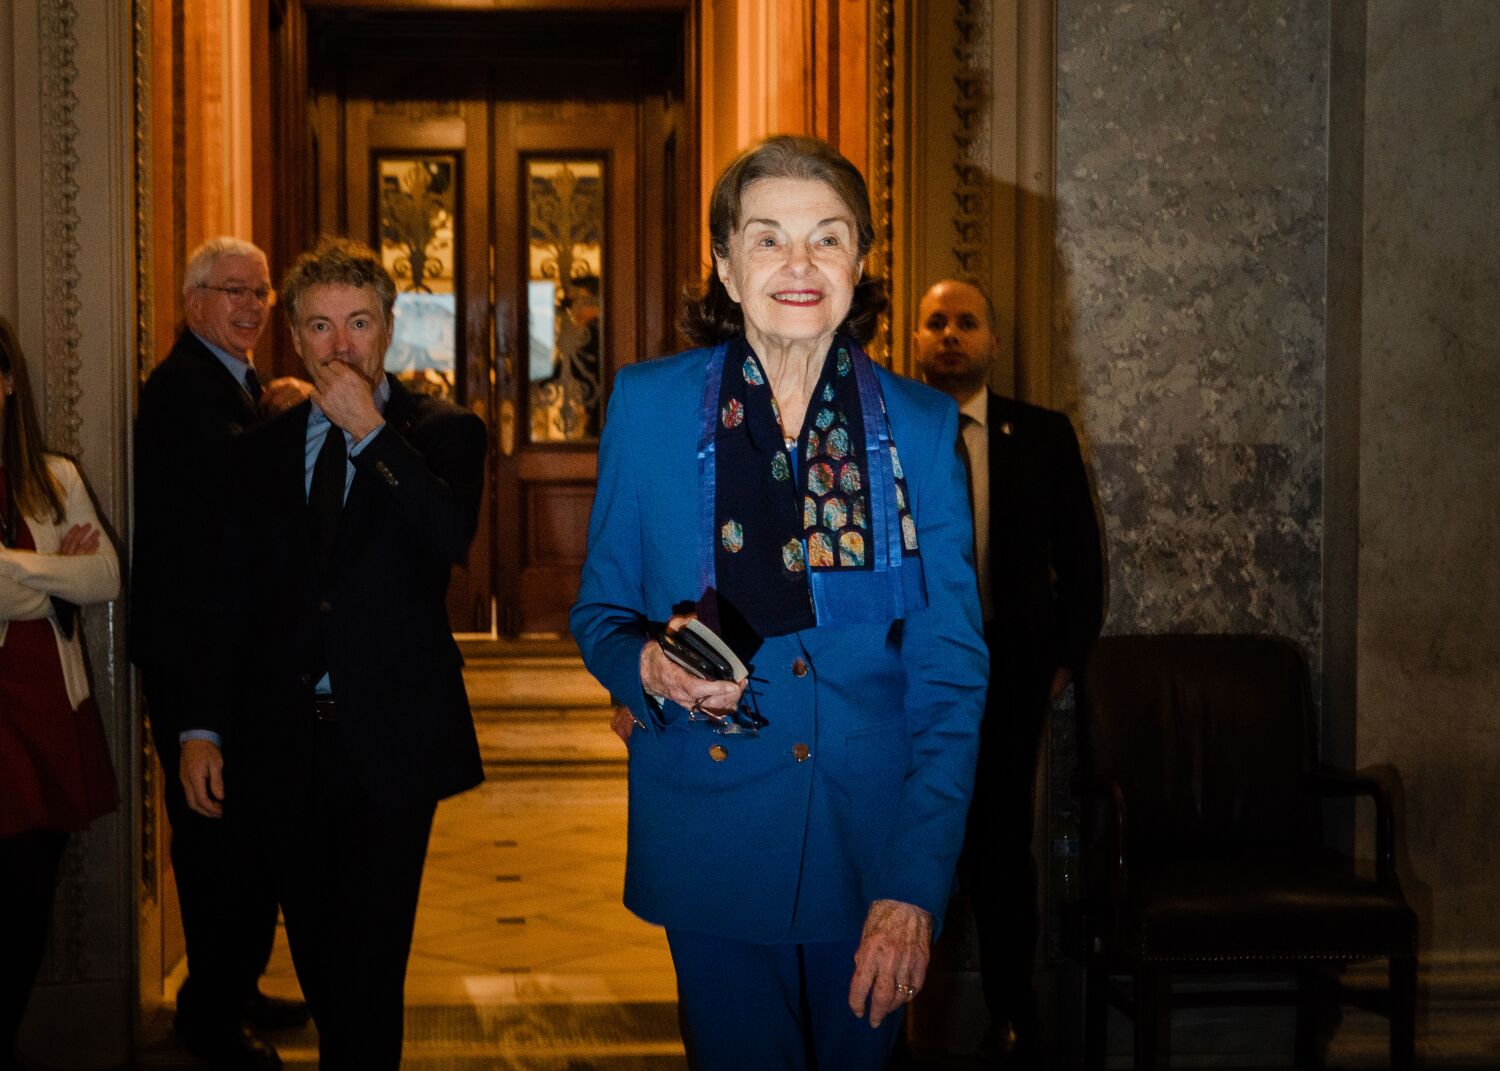 Sen. Dianne Feinstein is en route back to D.C. after extended absence